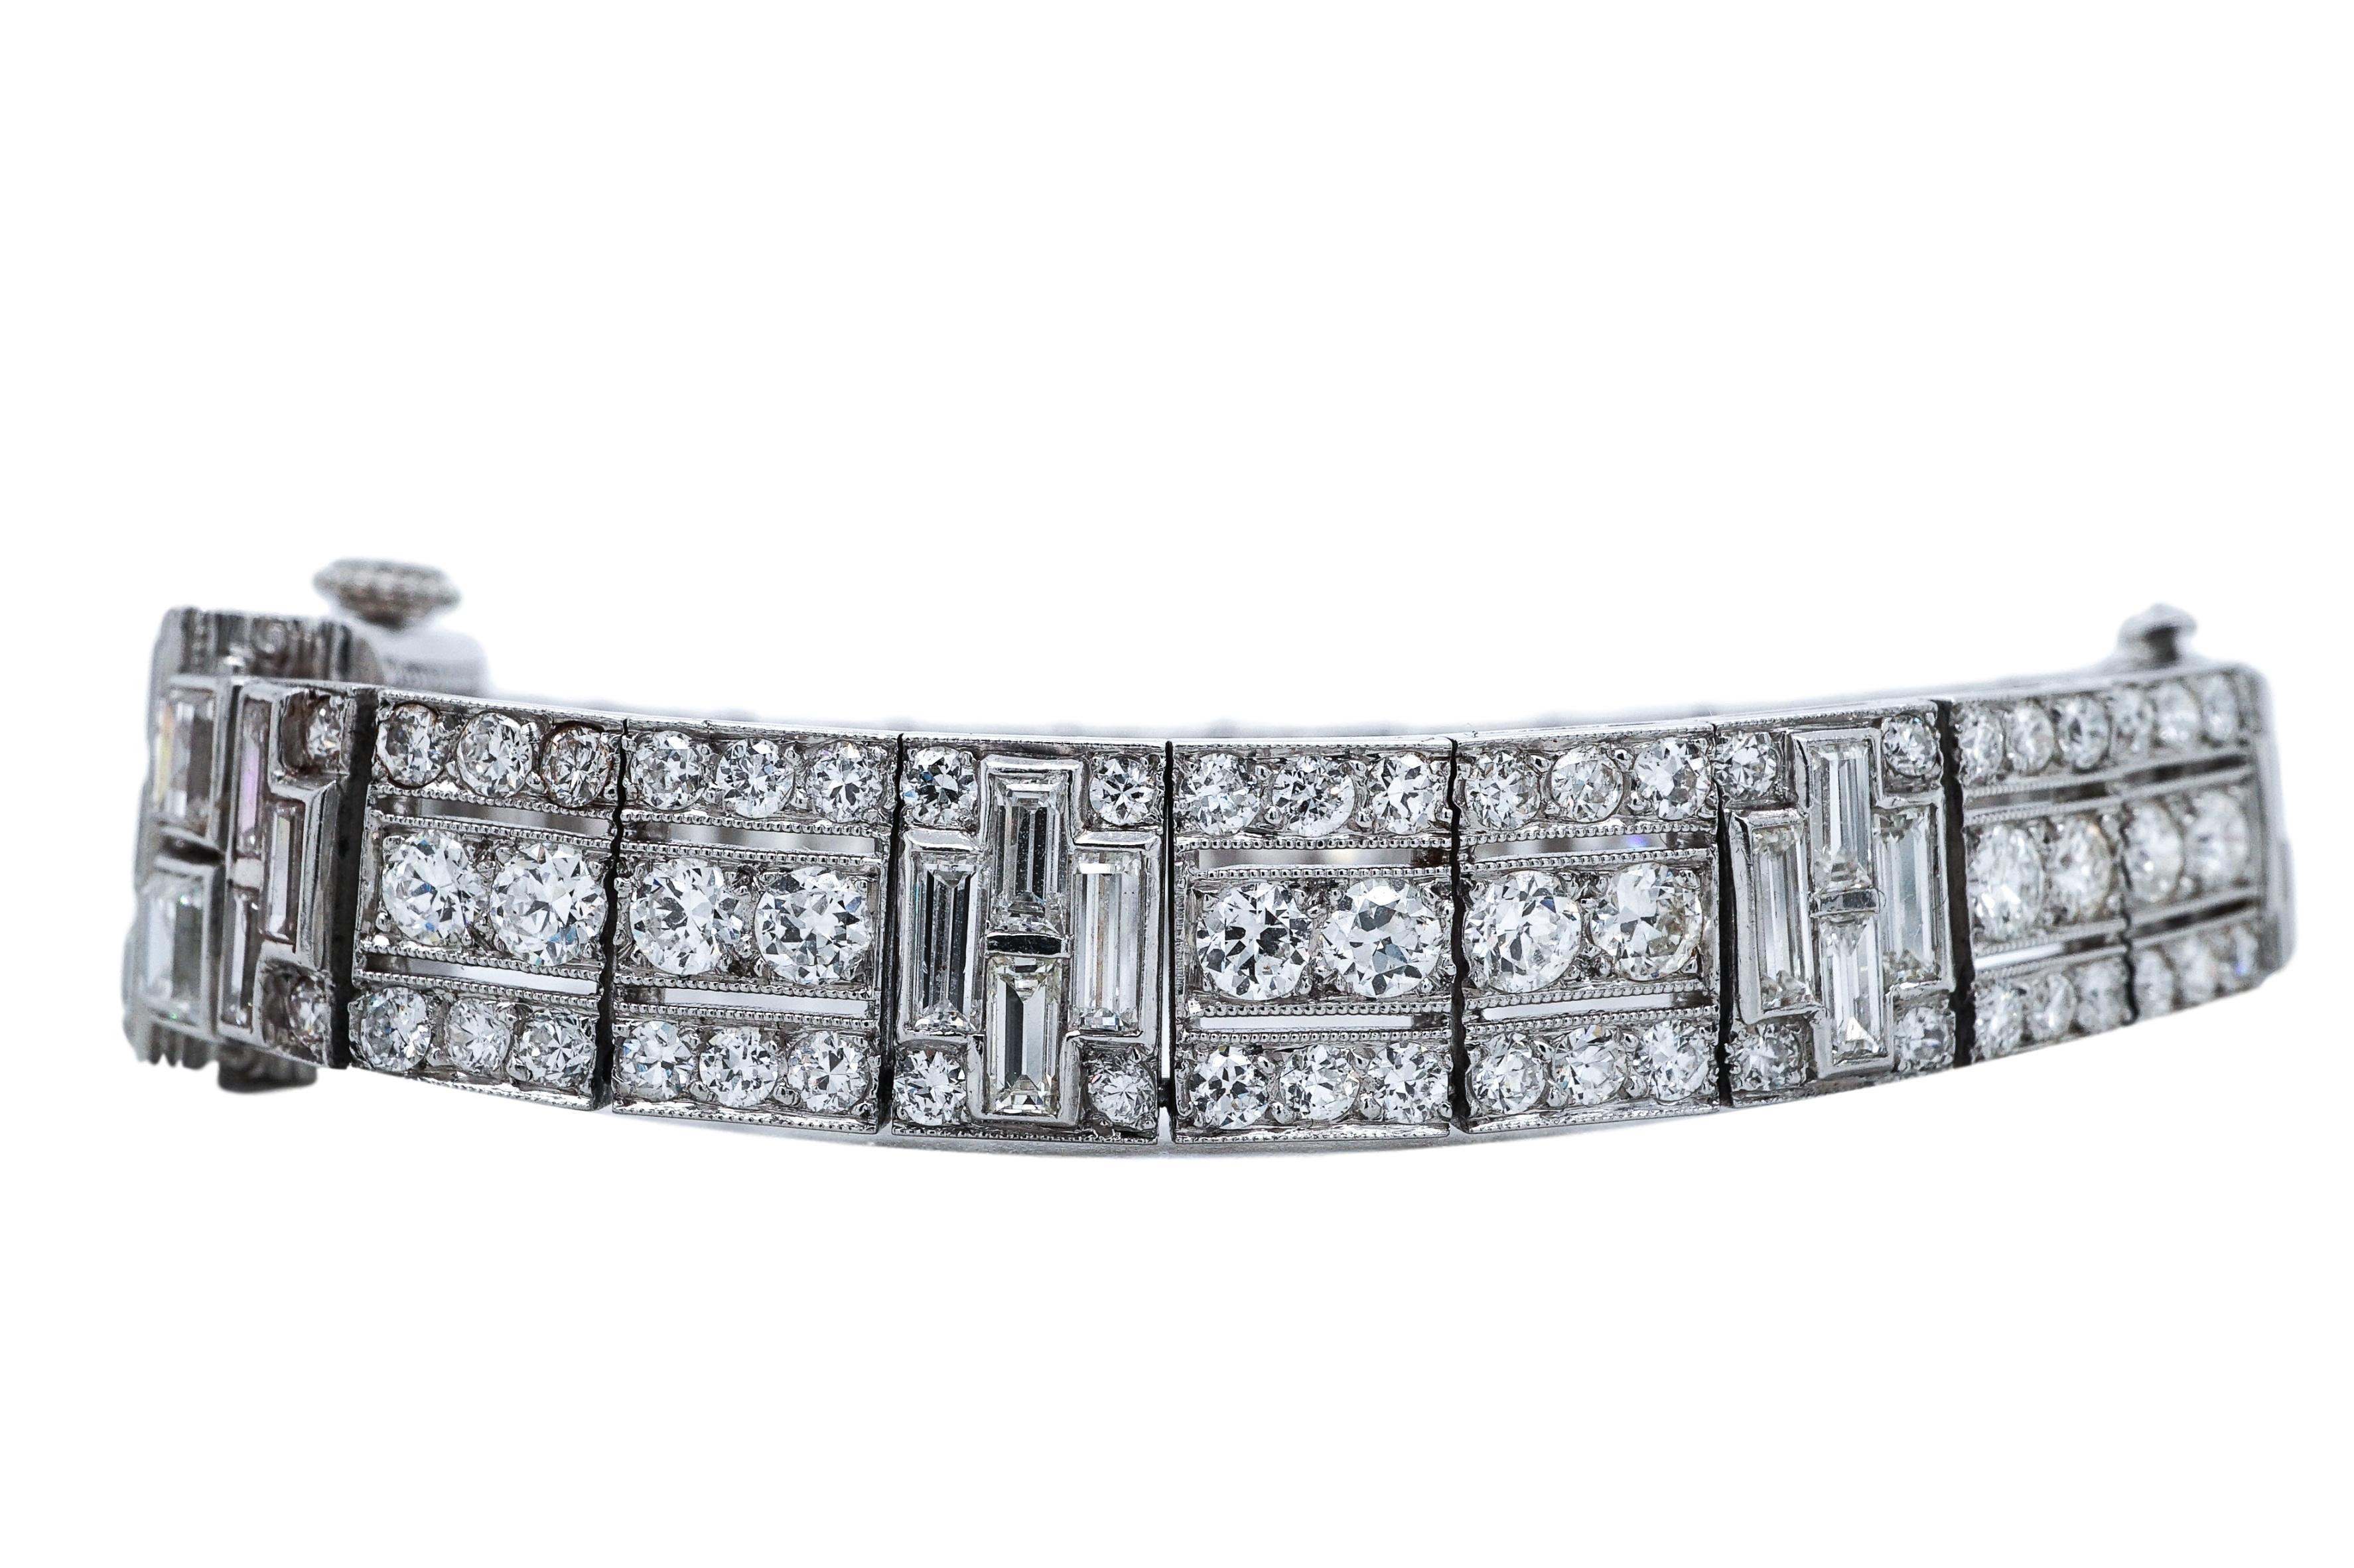 Tiffany & Co Art Deco Wrist Watch featuring square, baguette and old-cut diamonds. With a platinum and gold body, this wrist watch also features manual movement, and has a case width of 13.18 mm, 7 ins., established circa 1930, this beauty is signed